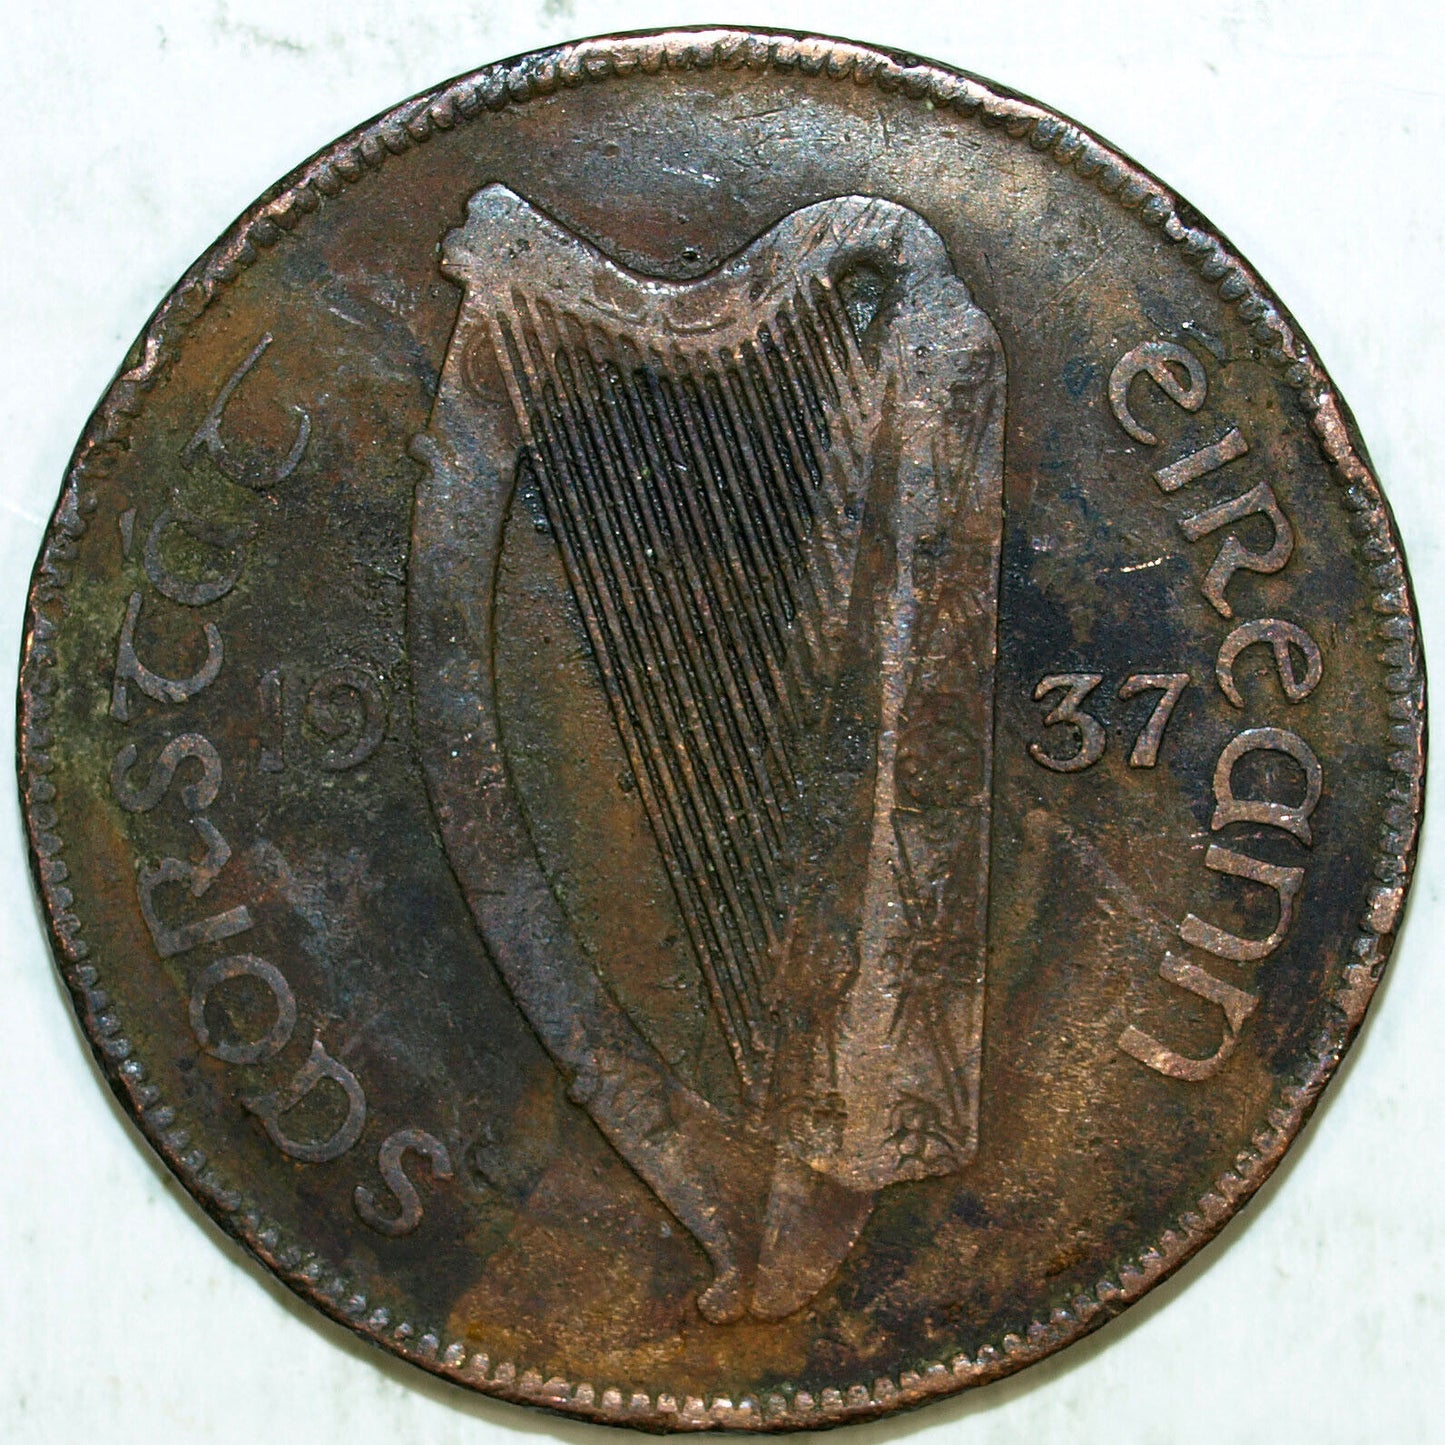 1937 Ireland One Penny Pingin☆☆ Circulated ☆☆ Great Collectible 514